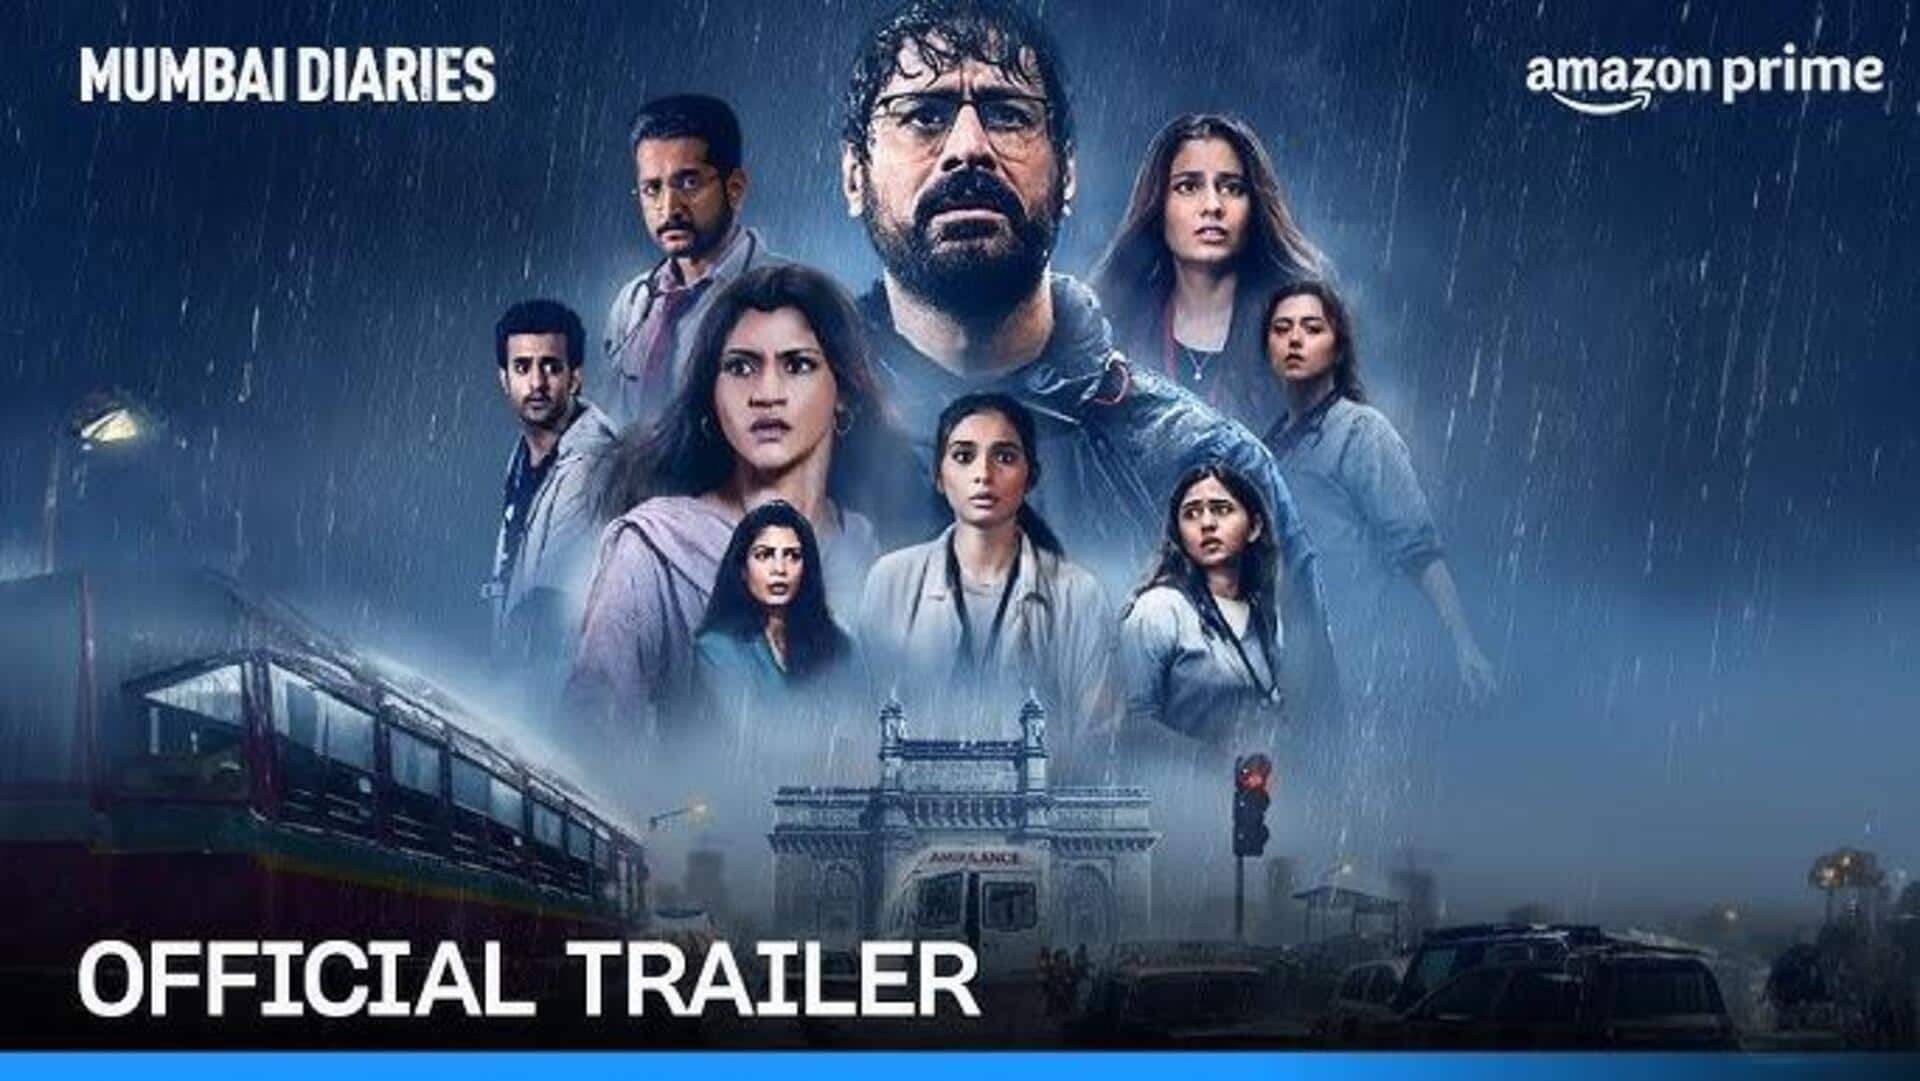 OTT: 'Mumbai Diaries' S02 trailer is about resistance and hope